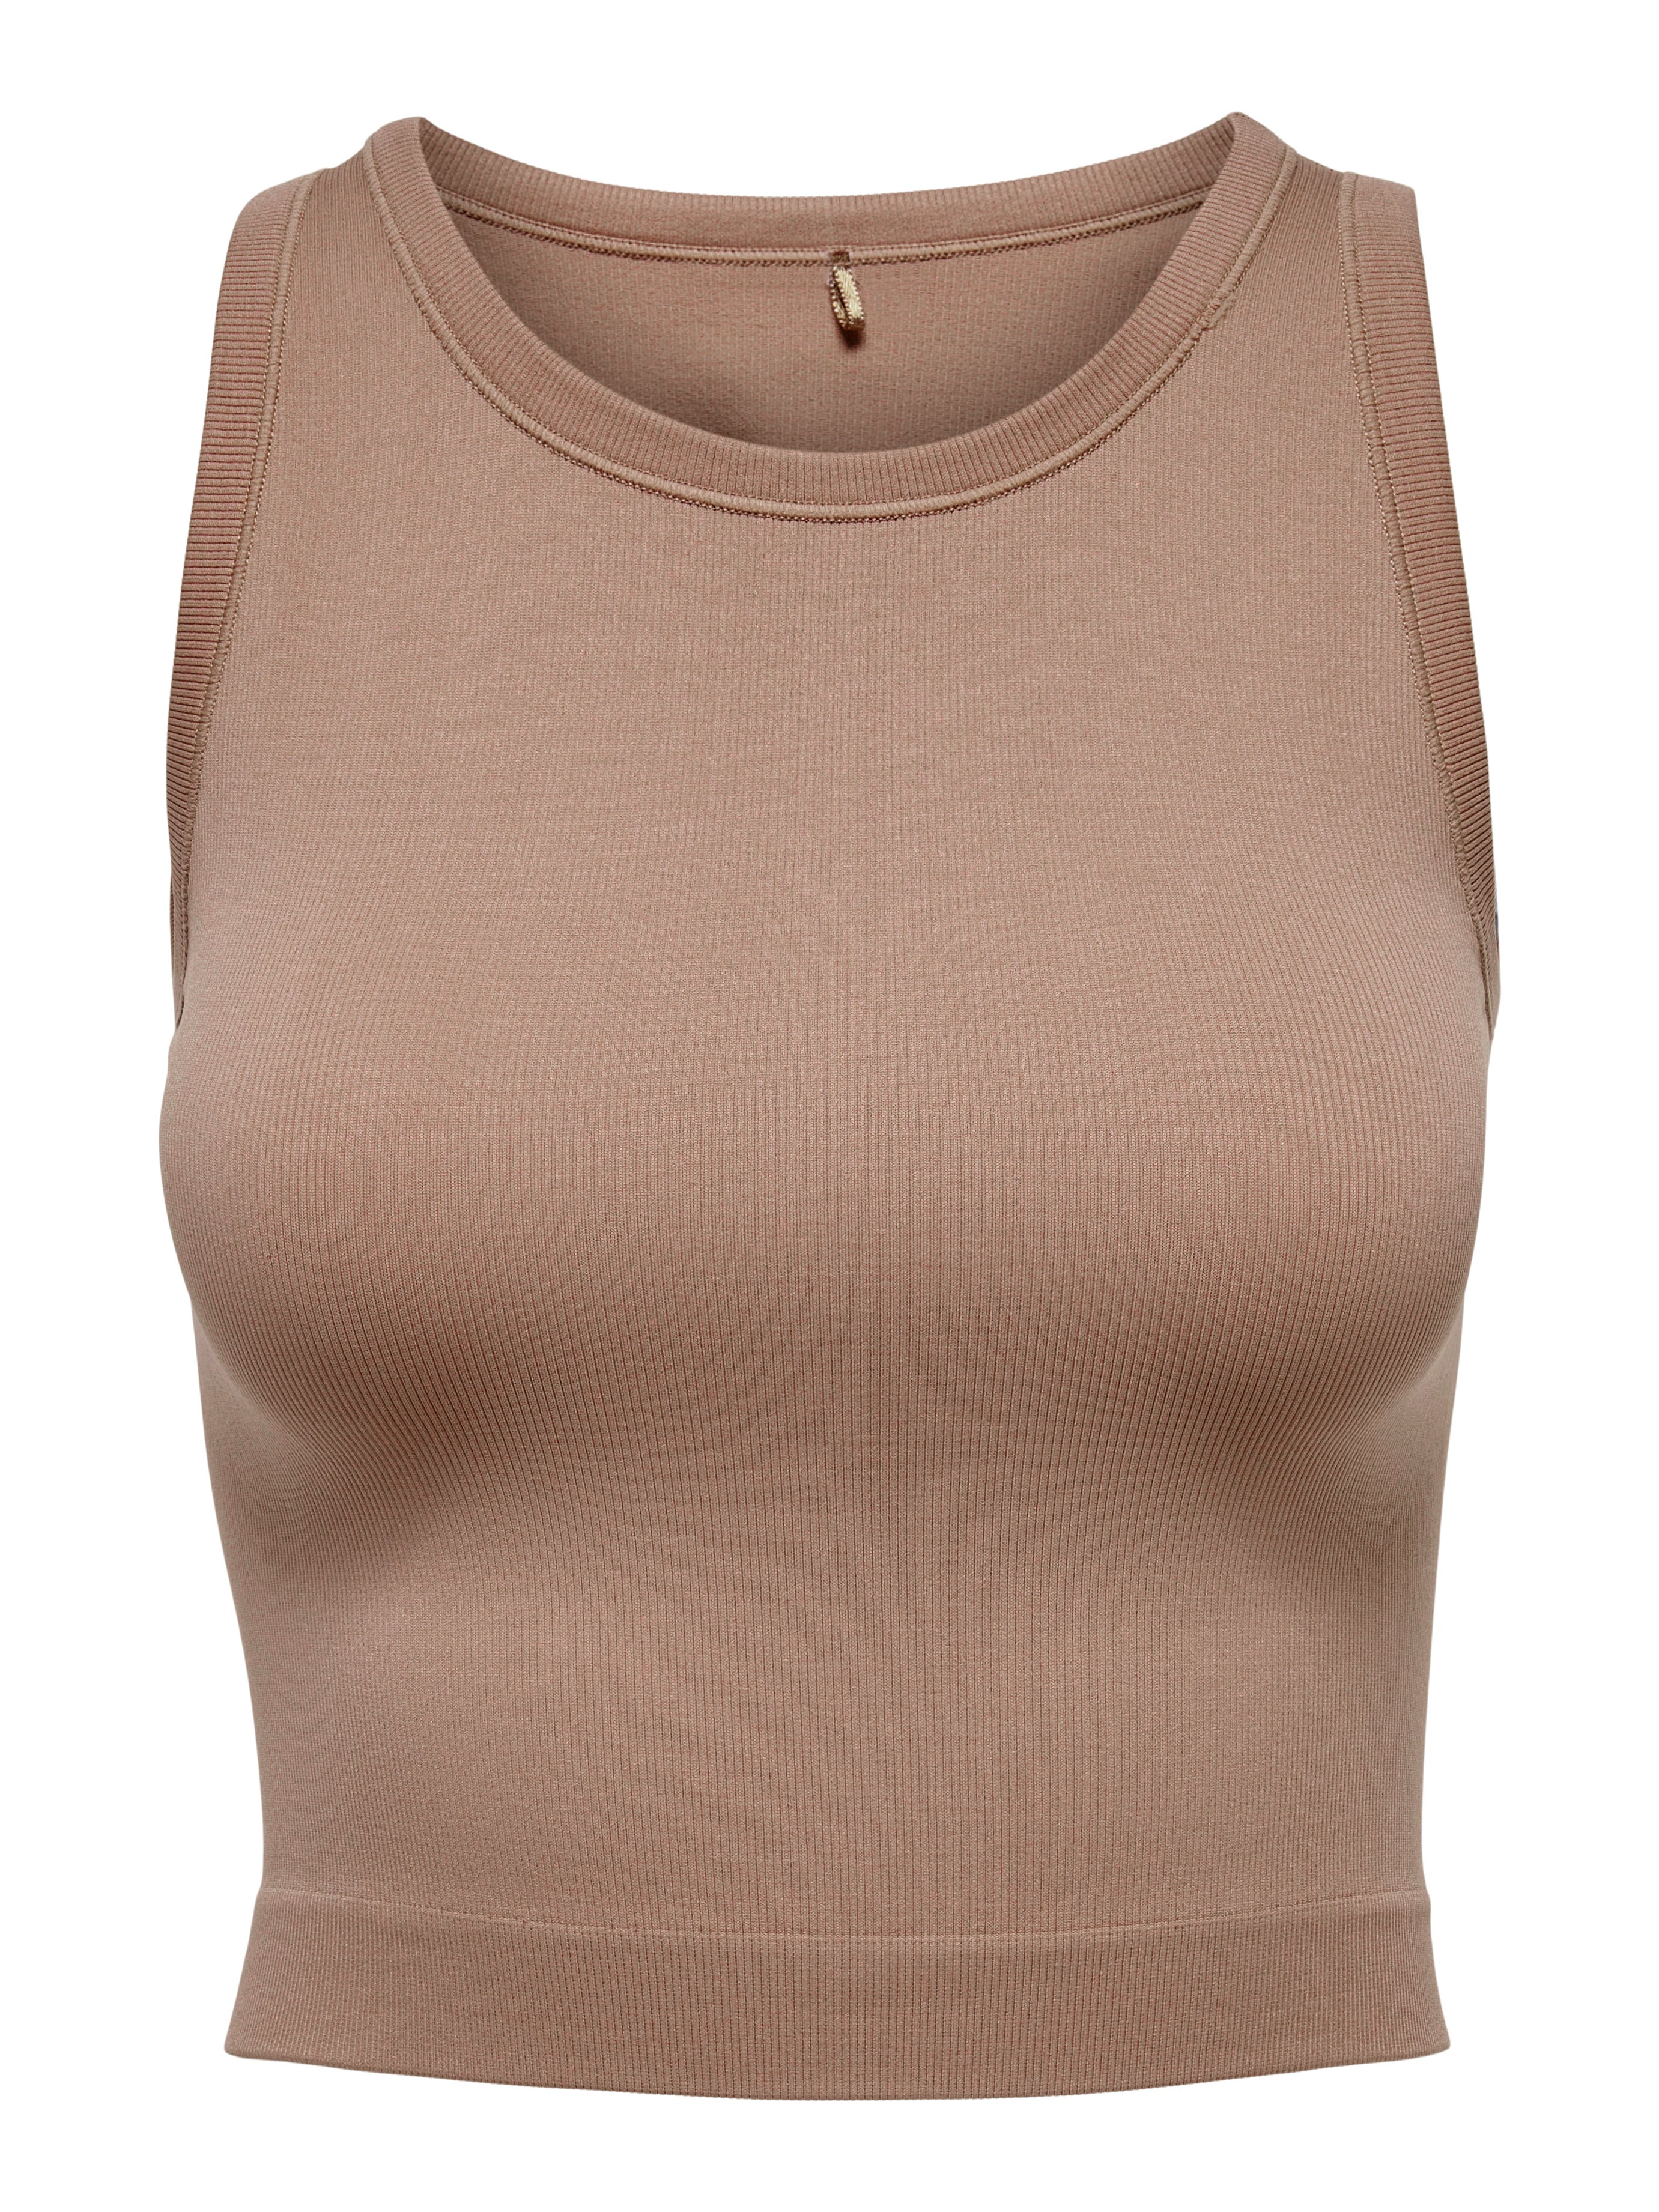 Wear Me Out WMO NWT Women L XL Beige Lt. Brown V Neck Ruched Racerback Tank  Top